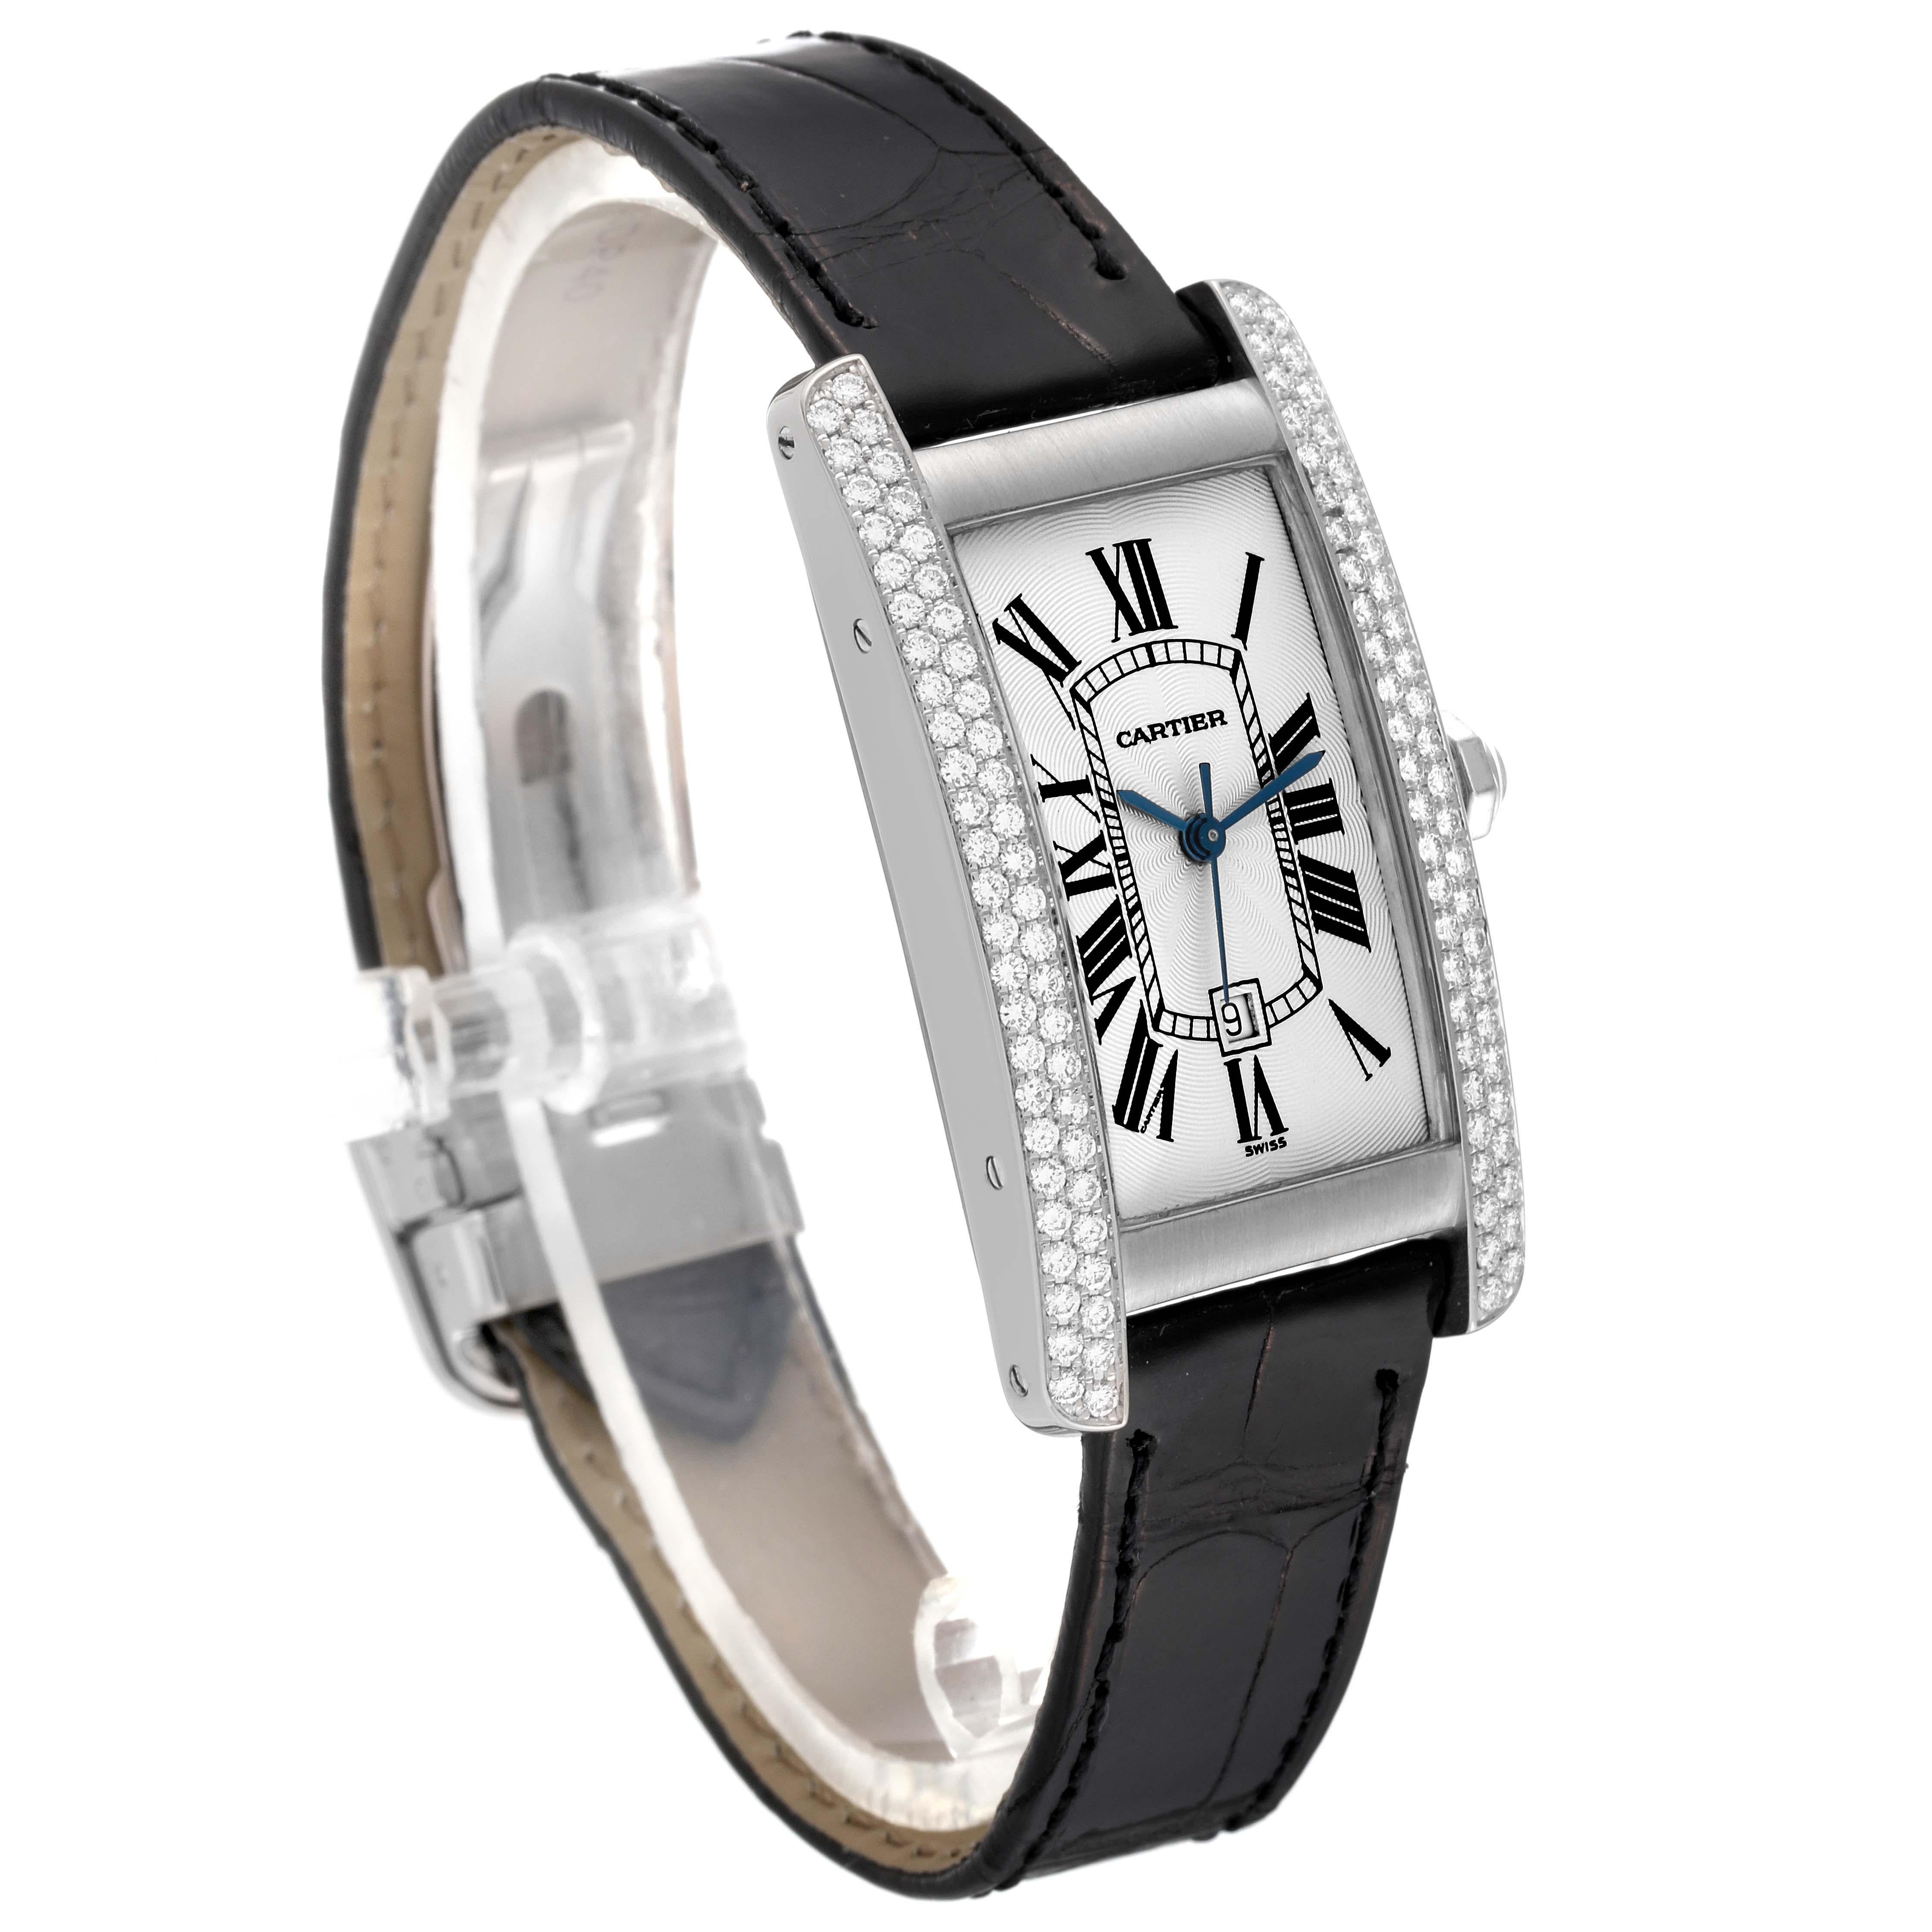 Cartier Tank Americaine White Gold Diamond Ladies Watch WB702651 For Sale 3